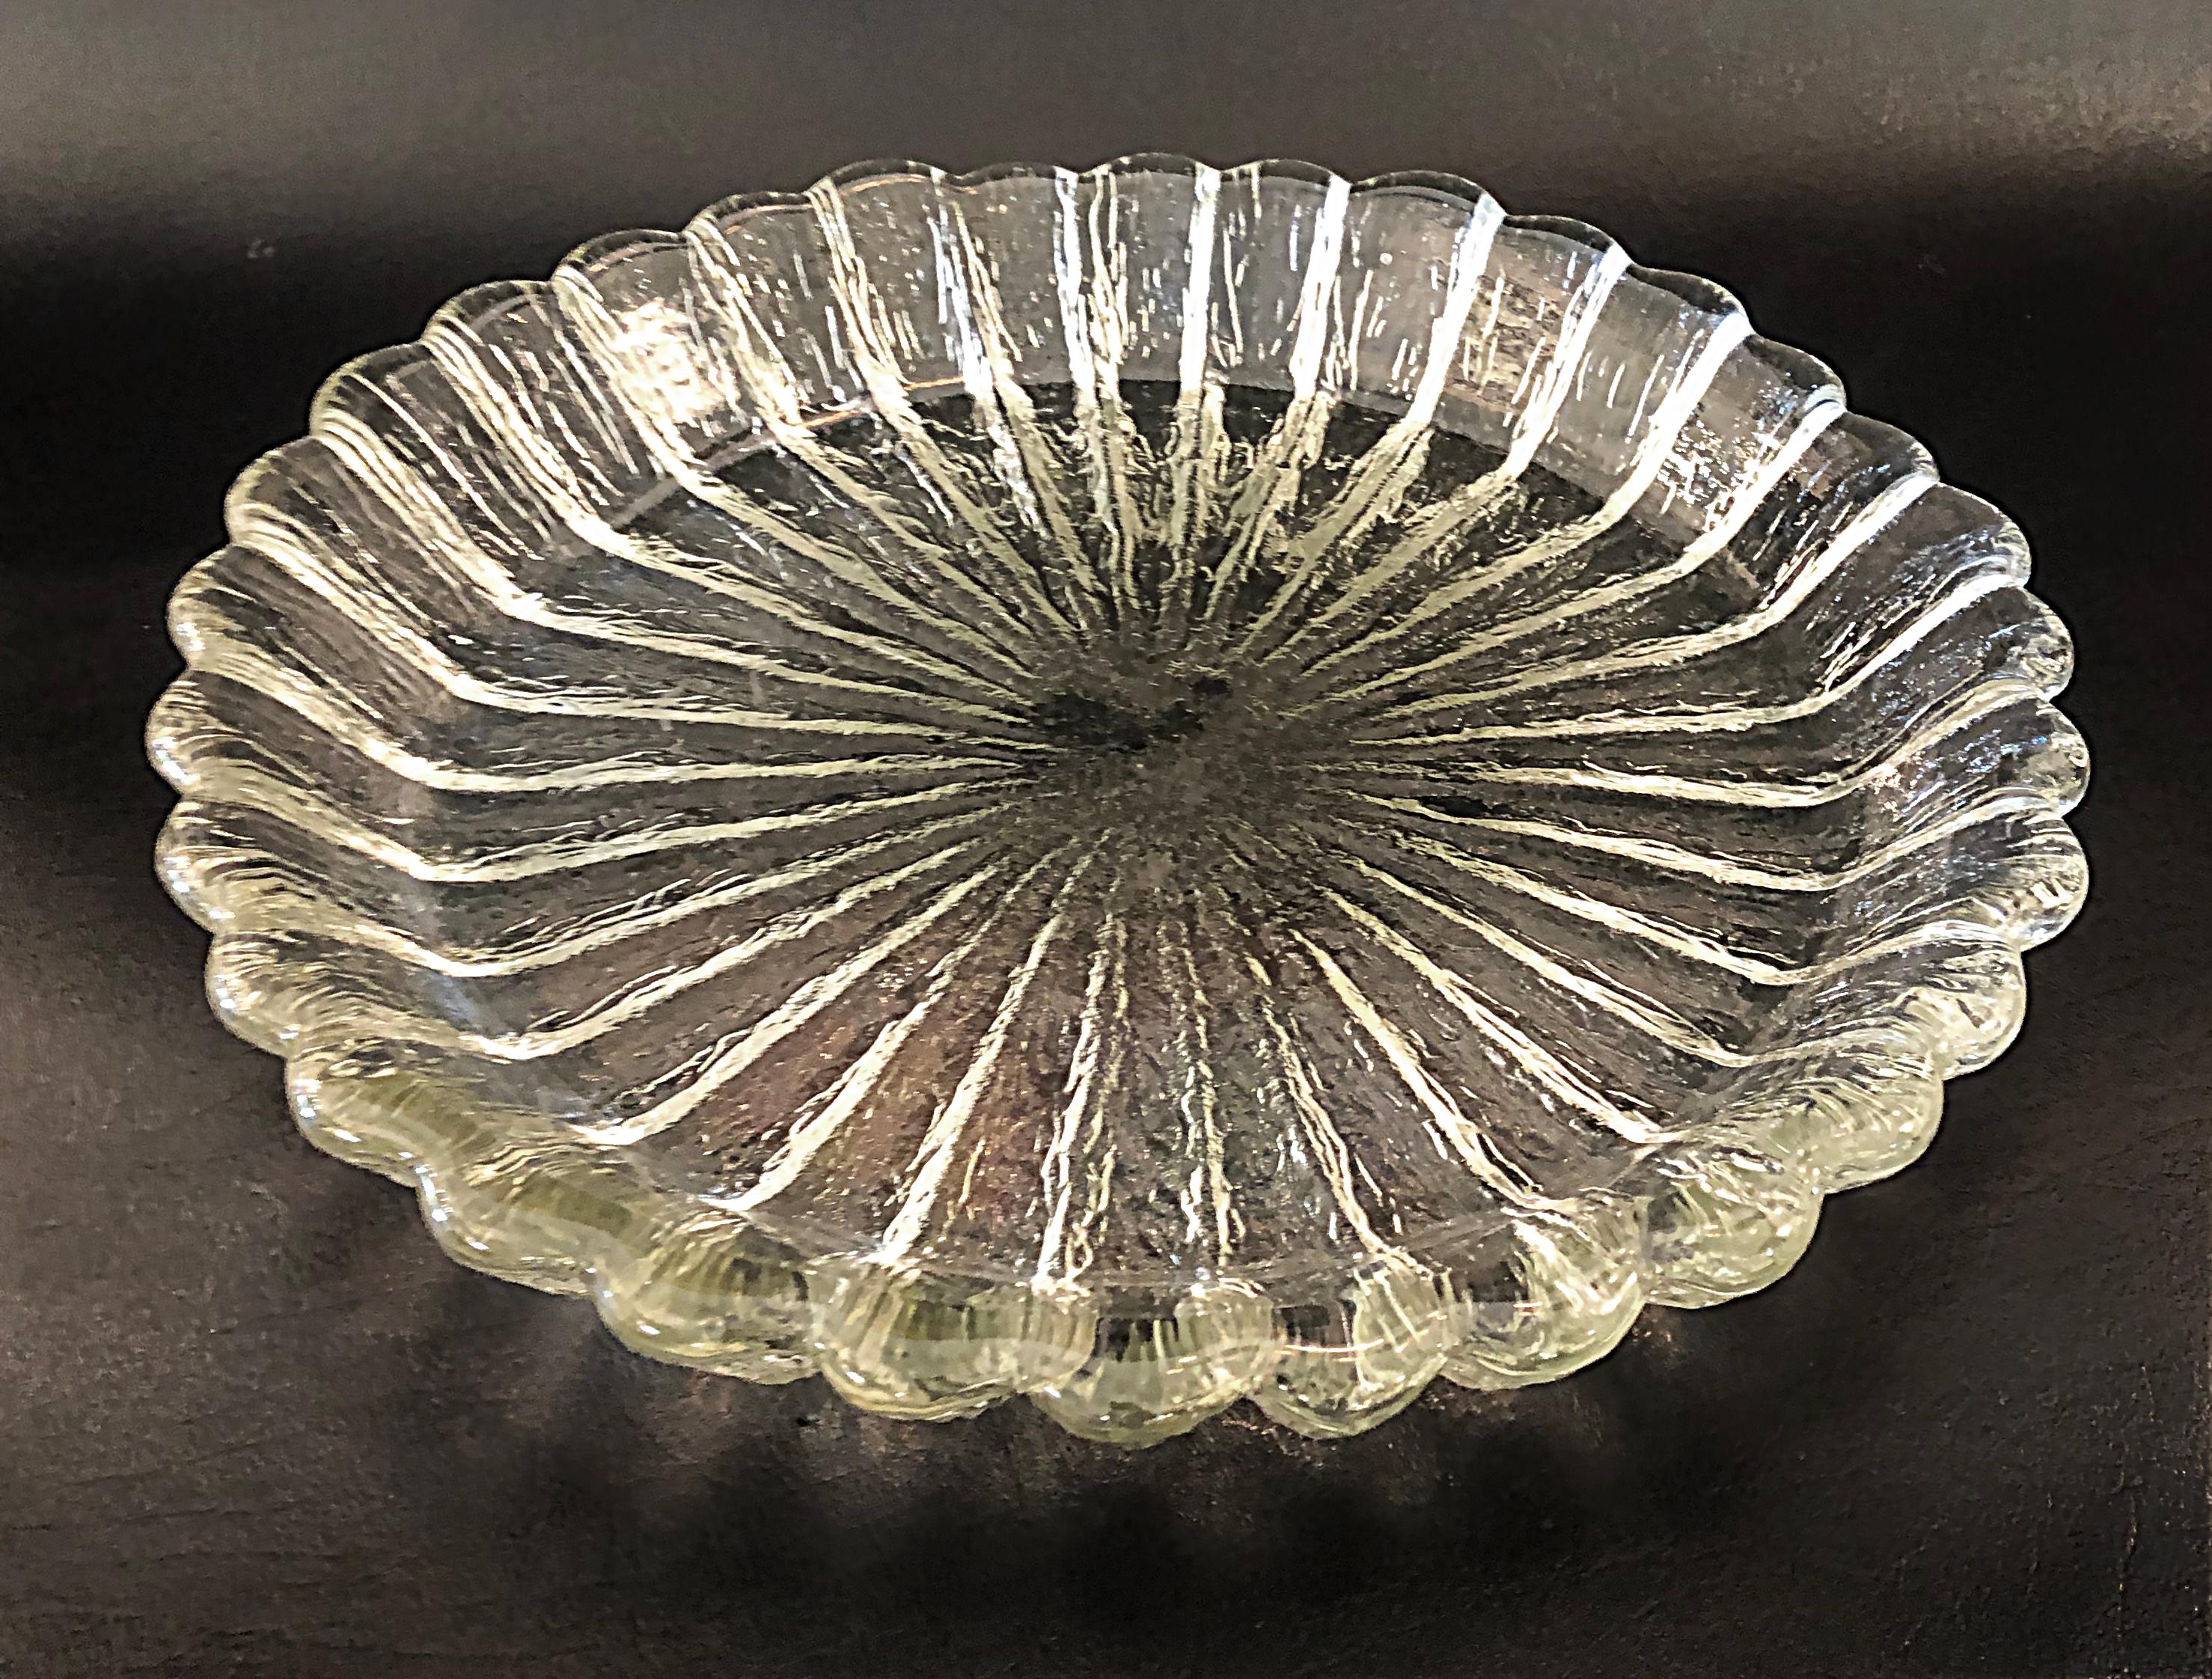 Mid-Century Modern Danish Modern Lead Crystal Centerpiece Bowl by Sidse Werner for Holmegaard Glass For Sale